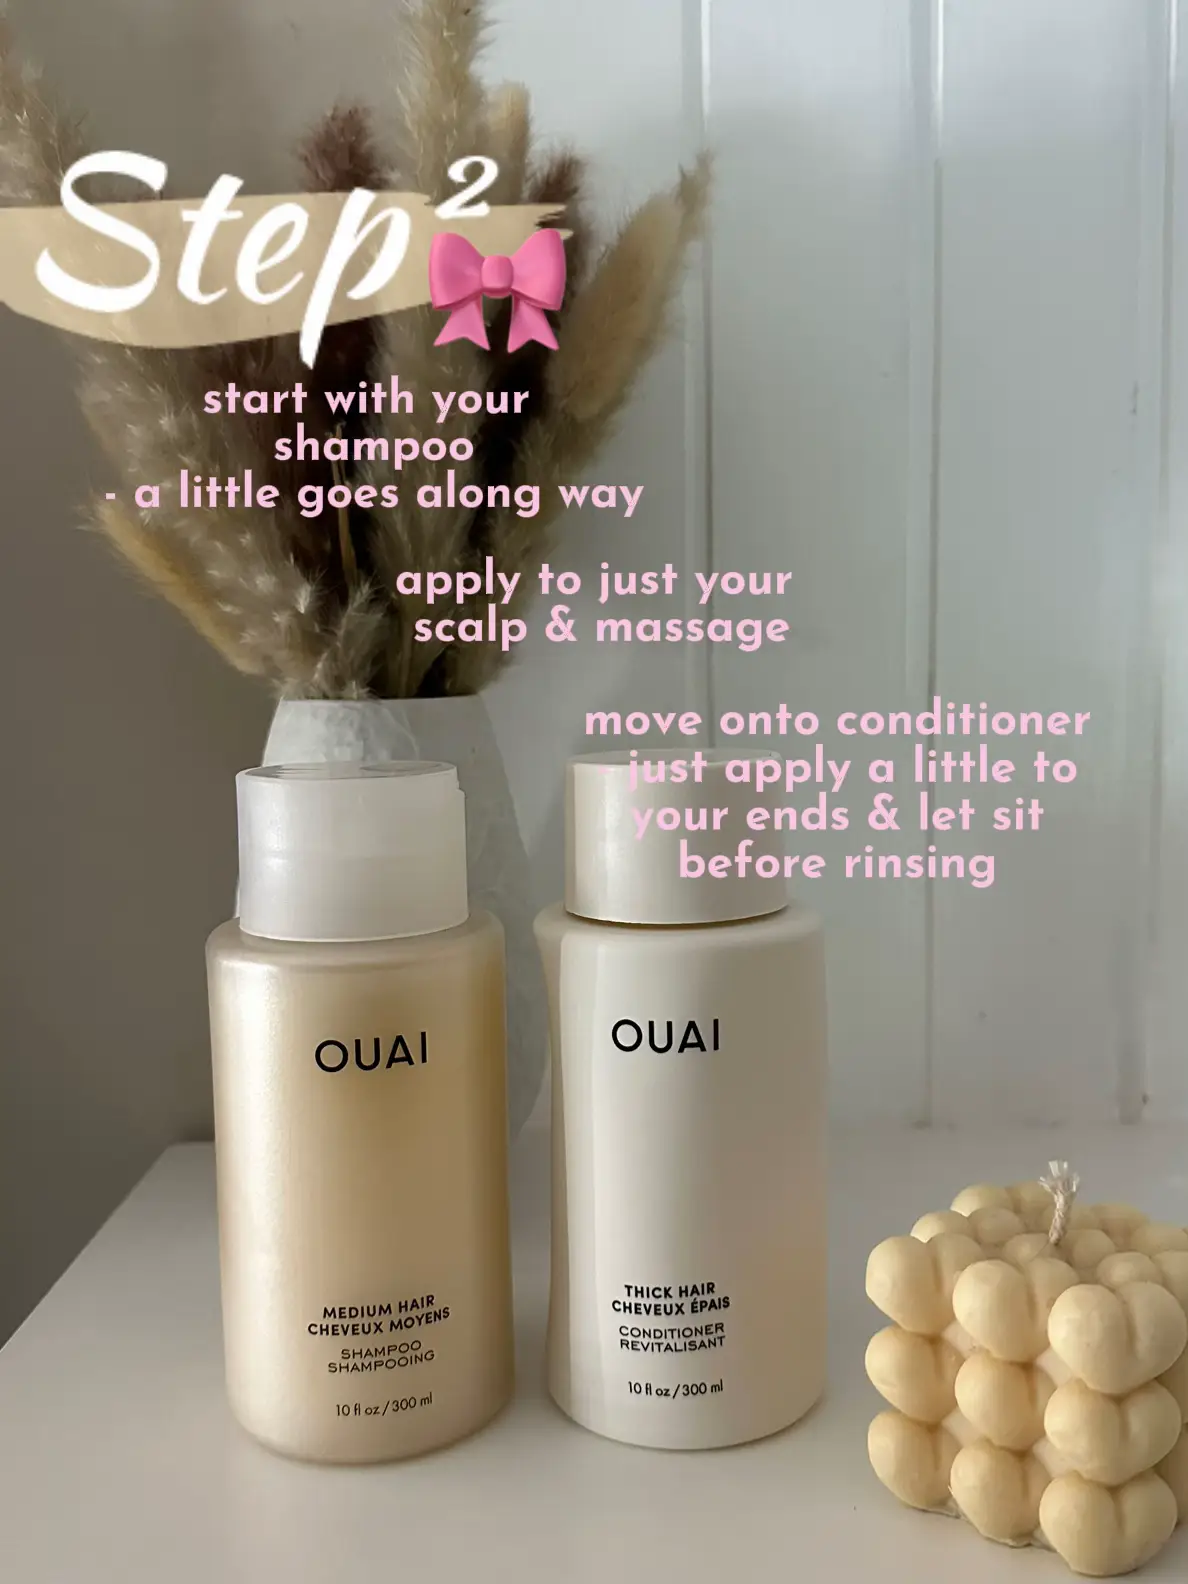  Two bottles of Ouai shampoo and condition